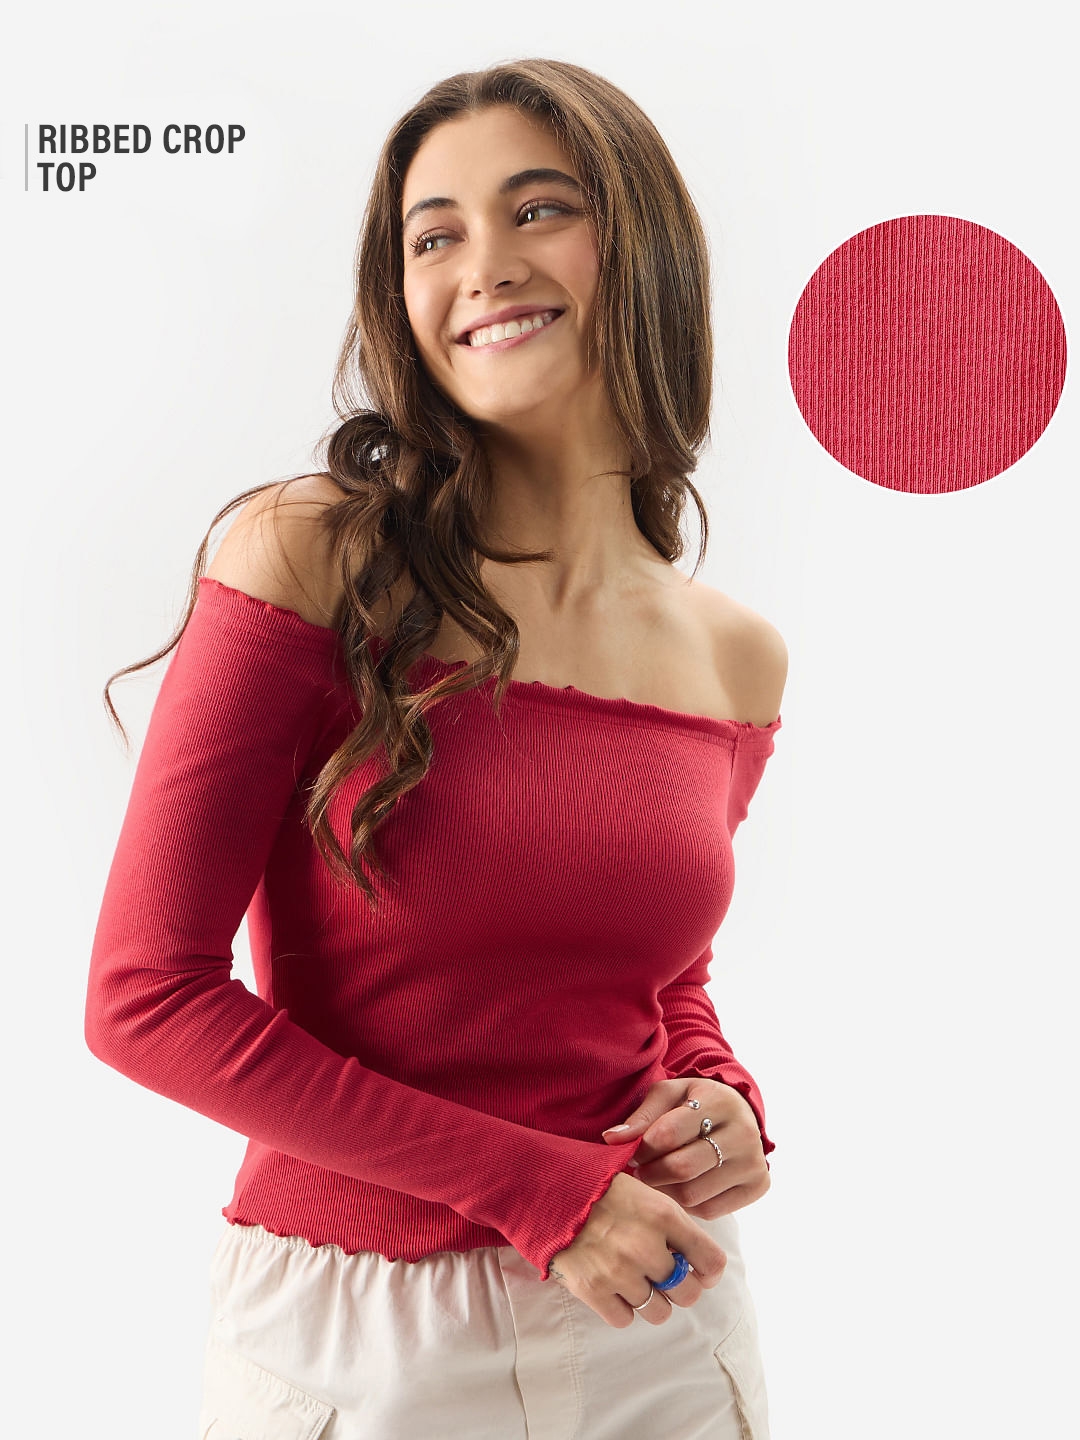 The Souled Store | Women's Bittersweet Ribbed Top Women's Full Sleeves Tops